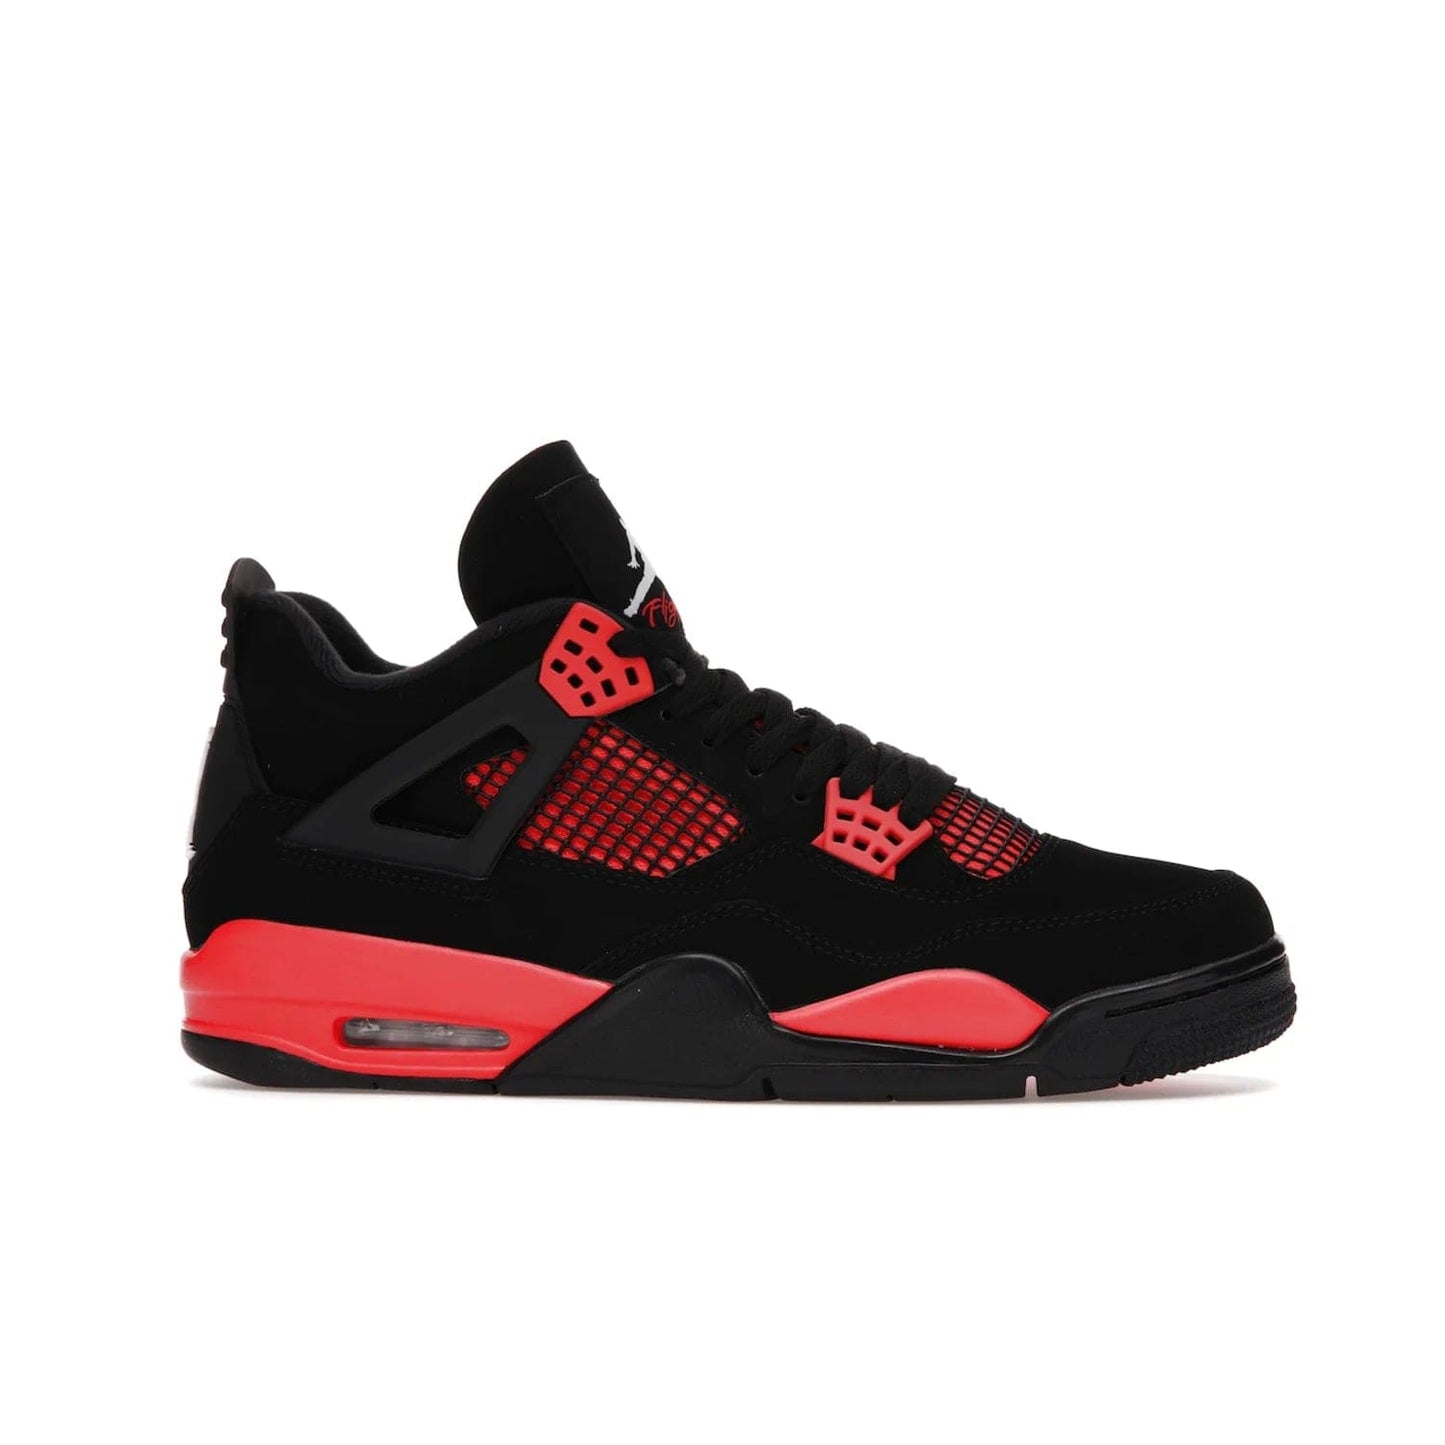 Jordan 4 Retro Red Thunder - Image 2 - Only at www.BallersClubKickz.com - Upscale your footwear with the Air Jordan 4 Retro Red Thunder. Featuring a Durabuck upper, red underlays, signature Flight patch, and vibrant red midsole, this retro sneaker adds style and edge. Releases in January 2022.